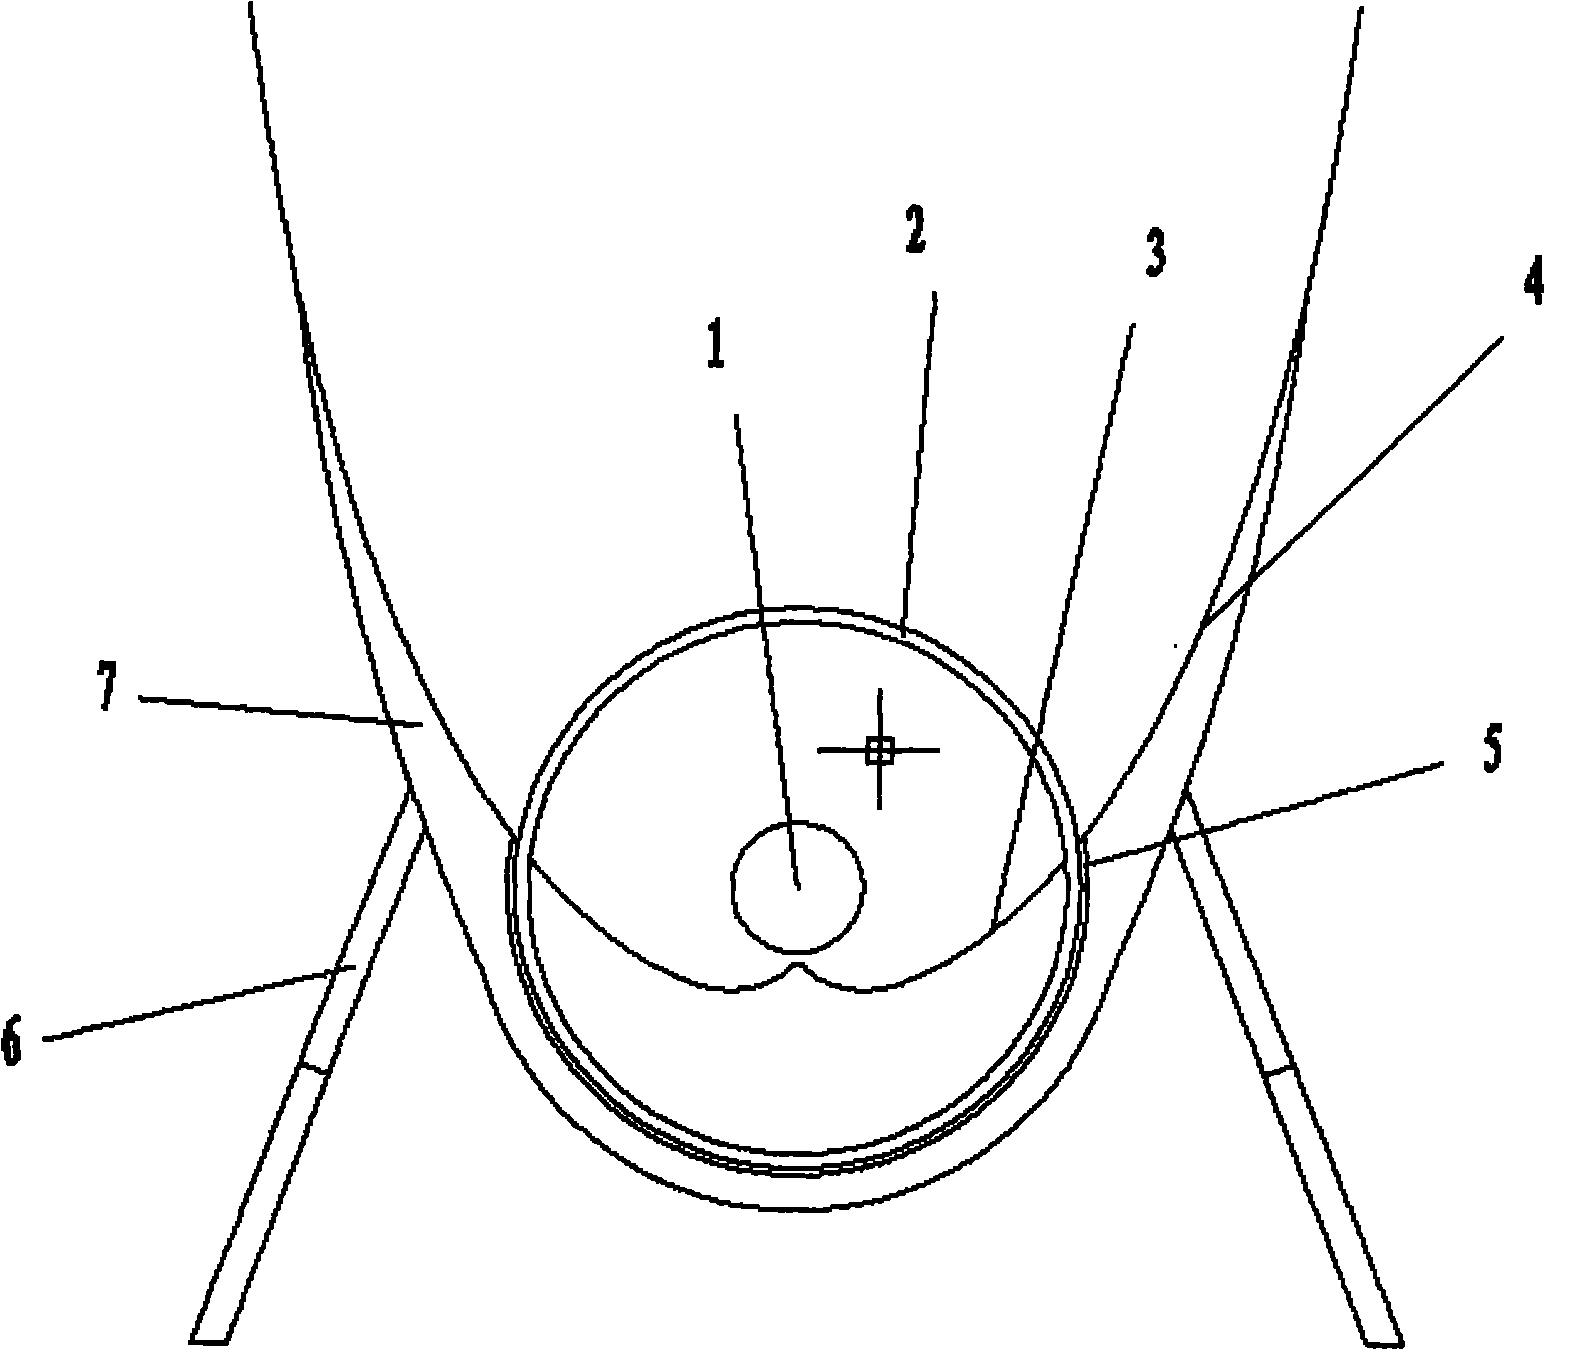 Compound parabolic condenser combining inside condensation and outside condensation